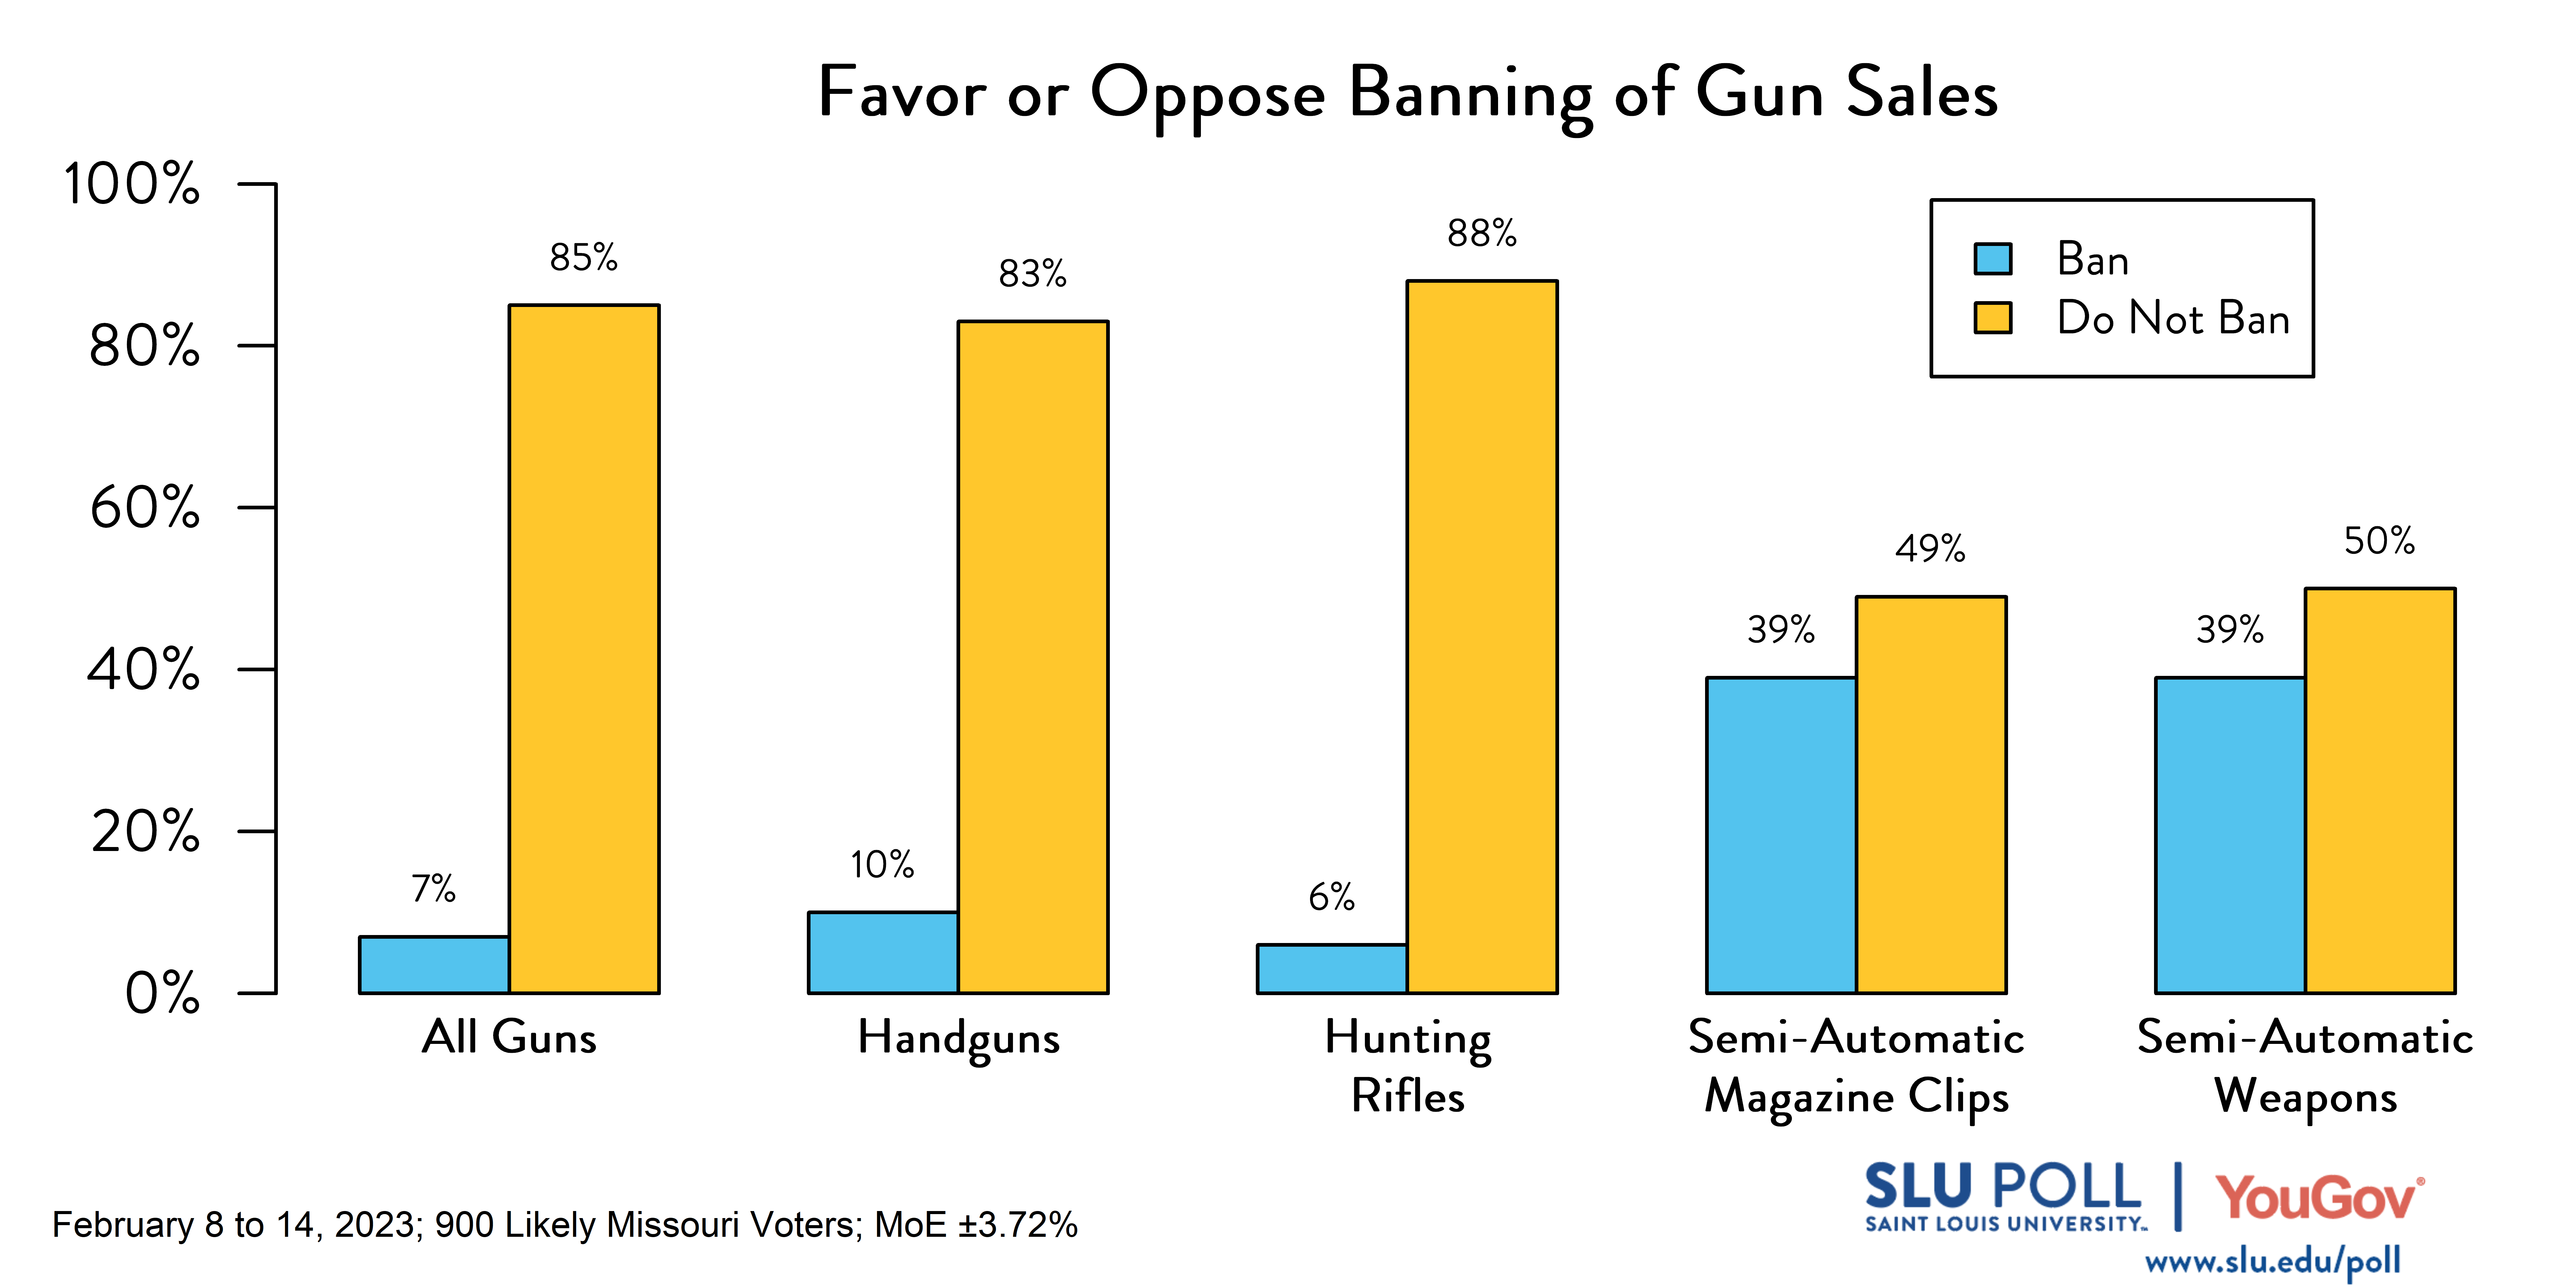 Likely voters' responses to 'Do you support banning the following gun-related sales, except those that are issued to law enforcement officers: The sale of all guns?': 7% Ban, 85% Do not ban. Likely voters' responses to 'Do you support banning the following gun-related sales, except those that are issued to law enforcement officers: The sale of all handguns?': 10% Ban, 83% Do not ban. Likely voters' responses to 'Do you support banning the following gun-related sales, except those that are issued to law enforcement officers: The sale of all hunting rifles?': 6% Ban, 88% Do not ban. Likely voters' responses to 'Do you support banning the following gun-related sales, except those that are issued to law enforcement officers: The sale of magazine clips for semi-automatic weapons?': 39% Ban, 49% Do not ban. Likely voters' responses to 'Do you support banning the following gun-related sales, except those that are issued to law enforcement officers: The sale of semi-automatic weapons? ': 39% Ban, 50% Do not ban.